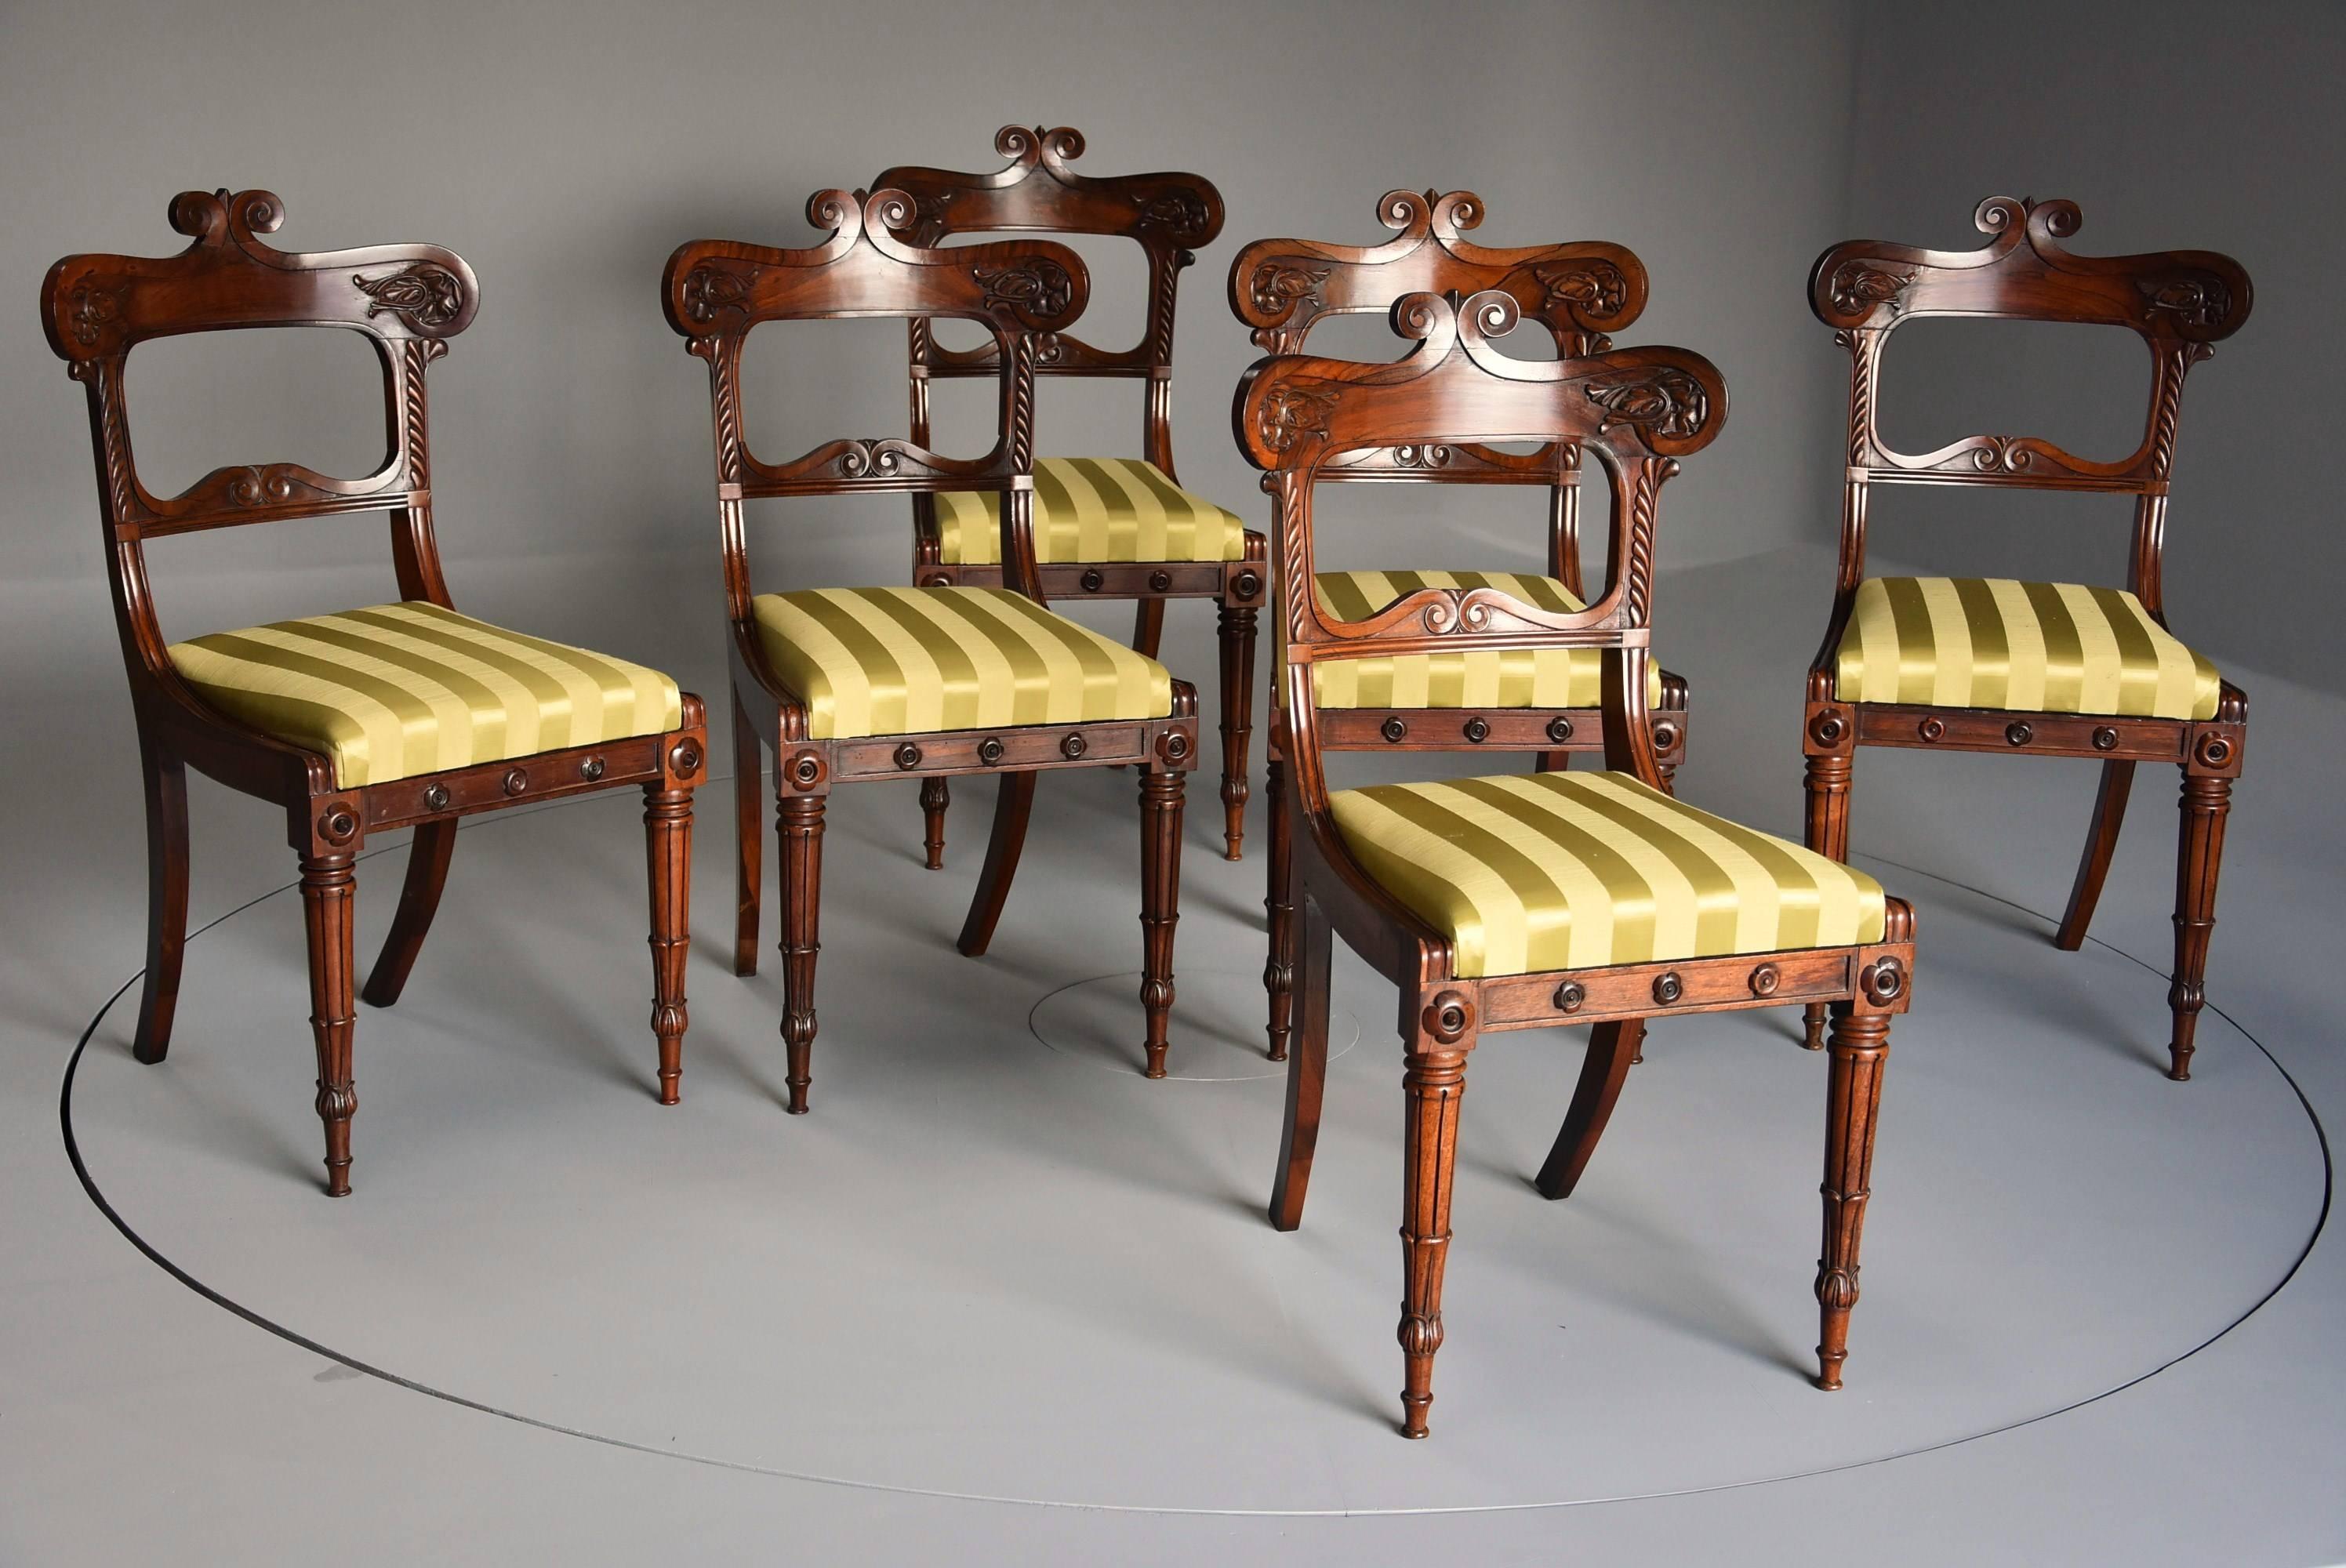 An early 19th century fine quality set of six Regency rosewood dining chairs.

This set of chairs each consist of a wide top rail with scrolling decoration with finely carved rosette and foliate decoration.

The side supports have gadrooned